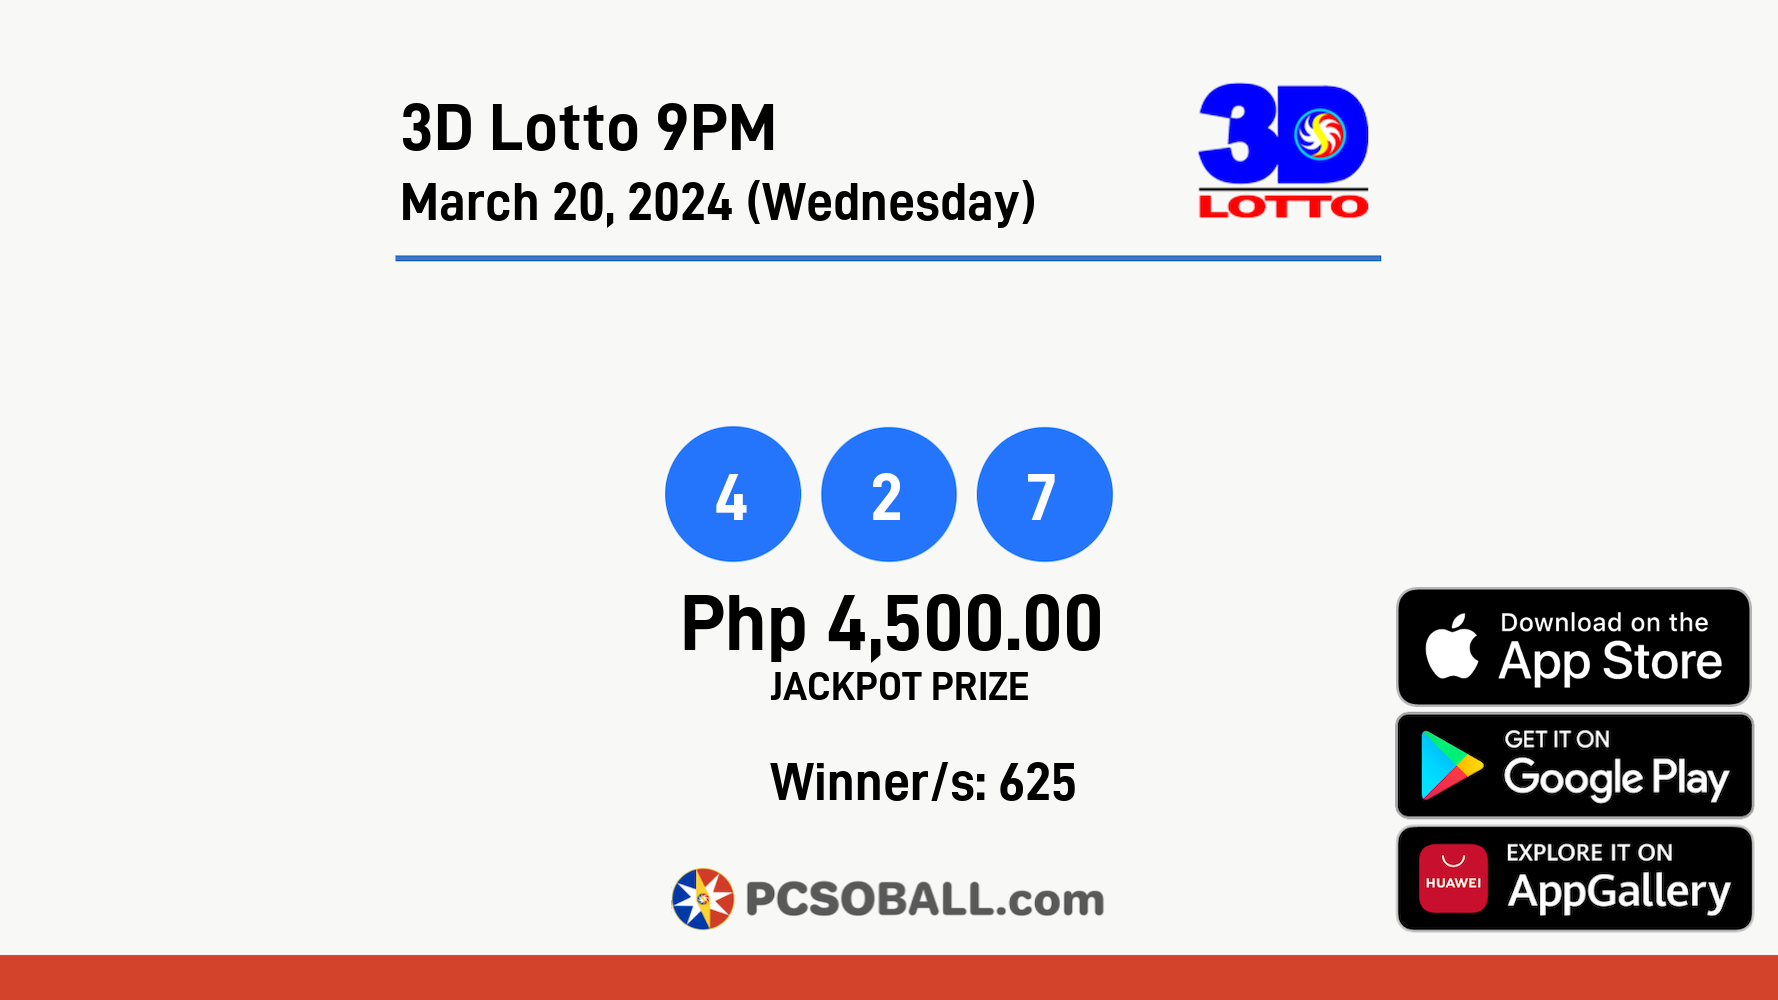 3D Lotto 9PM March 20, 2024 (Wednesday) Result